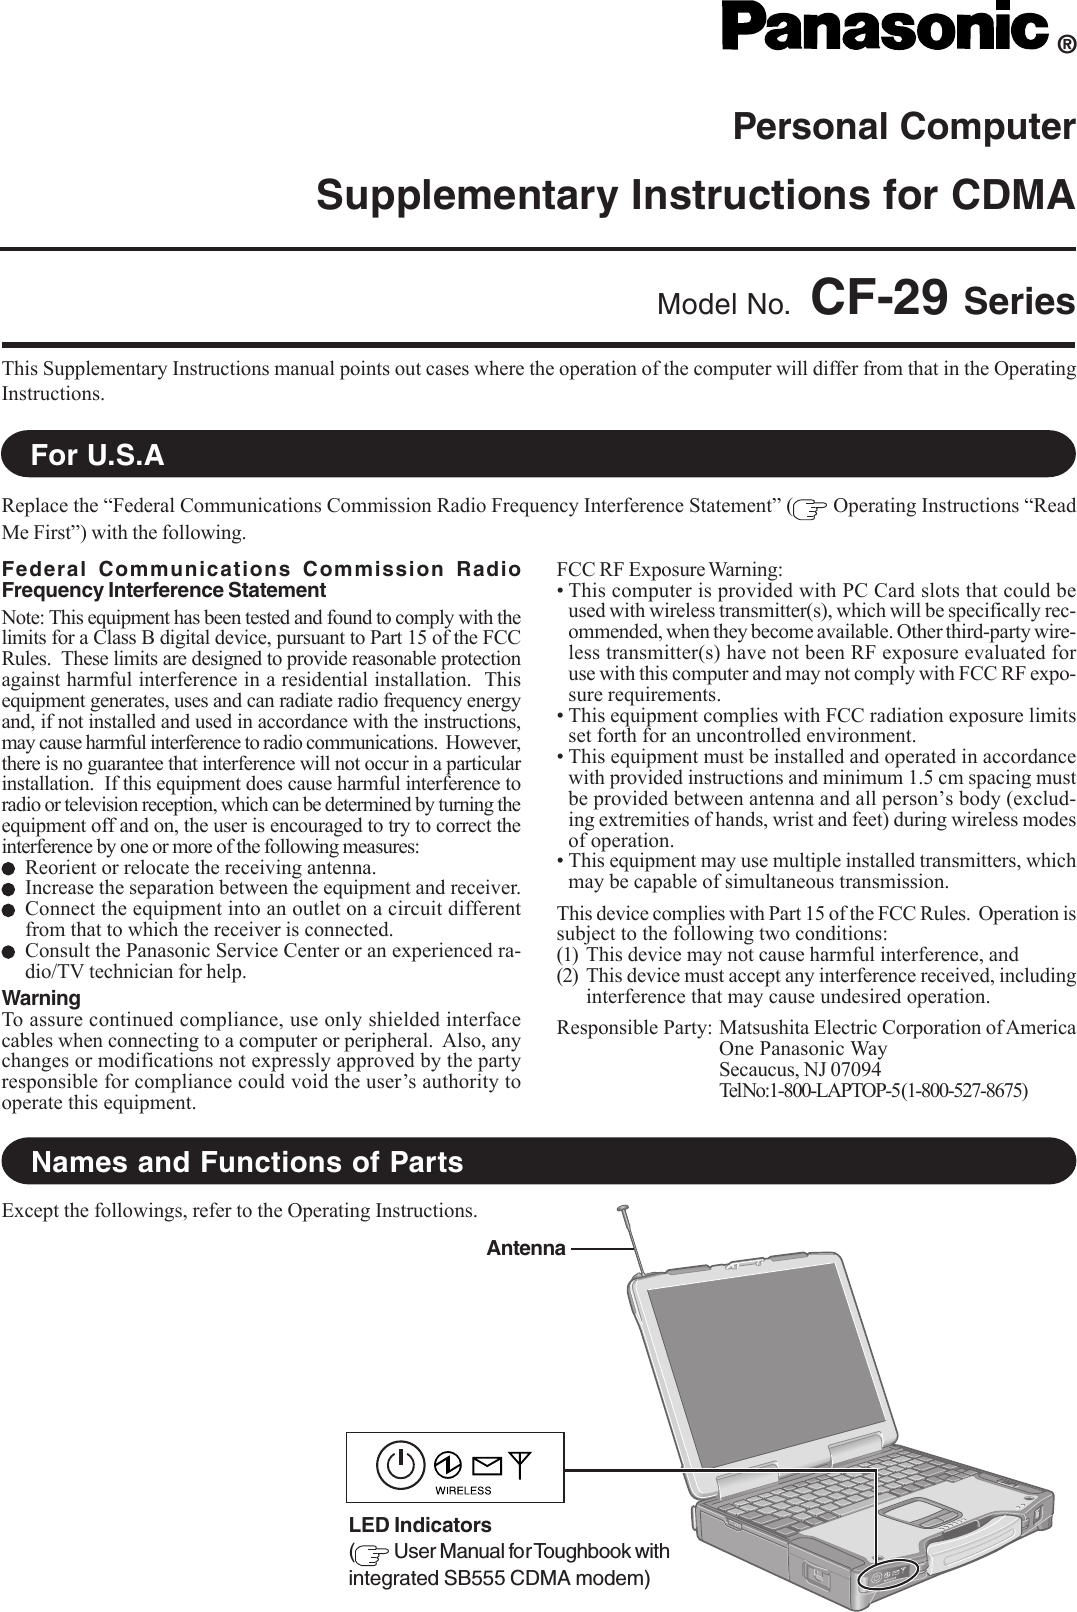 Personal ComputerSupplementary Instructions for CDMAThis Supplementary Instructions manual points out cases where the operation of the computer will differ from that in the OperatingInstructions.®Model No. CF-29 SeriesReplace the “Federal Communications Commission Radio Frequency Interference Statement” (  Operating Instructions “ReadMe First”) with the following.For U.S.ANames and Functions of PartsFederal Communications Commission RadioFrequency Interference StatementNote: This equipment has been tested and found to comply with thelimits for a Class B digital device, pursuant to Part 15 of the FCCRules.  These limits are designed to provide reasonable protectionagainst harmful interference in a residential installation.  Thisequipment generates, uses and can radiate radio frequency energyand, if not installed and used in accordance with the instructions,may cause harmful interference to radio communications.  However,there is no guarantee that interference will not occur in a particularinstallation.  If this equipment does cause harmful interference toradio or television reception, which can be determined by turning theequipment off and on, the user is encouraged to try to correct theinterference by one or more of the following measures:Reorient or relocate the receiving antenna.Increase the separation between the equipment and receiver.Connect the equipment into an outlet on a circuit differentfrom that to which the receiver is connected.Consult the Panasonic Service Center or an experienced ra-dio/TV technician for help.WarningTo assure continued compliance, use only shielded interfacecables when connecting to a computer or peripheral.  Also, anychanges or modifications not expressly approved by the partyresponsible for compliance could void the user’s authority tooperate this equipment.FCC RF Exposure Warning:• This computer is provided with PC Card slots that could beused with wireless transmitter(s), which will be specifically rec-ommended, when they become available. Other third-party wire-less transmitter(s) have not been RF exposure evaluated foruse with this computer and may not comply with FCC RF expo-sure requirements.• This equipment complies with FCC radiation exposure limitsset forth for an uncontrolled environment.• This equipment must be installed and operated in accordancewith provided instructions and minimum 1.5 cm spacing mustbe provided between antenna and all person’s body (exclud-ing extremities of hands, wrist and feet) during wireless modesof operation.• This equipment may use multiple installed transmitters, whichmay be capable of simultaneous transmission.This device complies with Part 15 of the FCC Rules.  Operation issubject to the following two conditions:(1) This device may not cause harmful interference, and(2) This device must accept any interference received, includinginterference that may cause undesired operation.Responsible Party: Matsushita Electric Corporation of AmericaOne Panasonic WaySecaucus, NJ 07094Tel No:1-800-LAPTOP-5 (1-800-527-8675)Except the followings, refer to the Operating Instructions.AntennaLED Indicators( User Manual for Toughbook withintegrated SB555 CDMA modem)